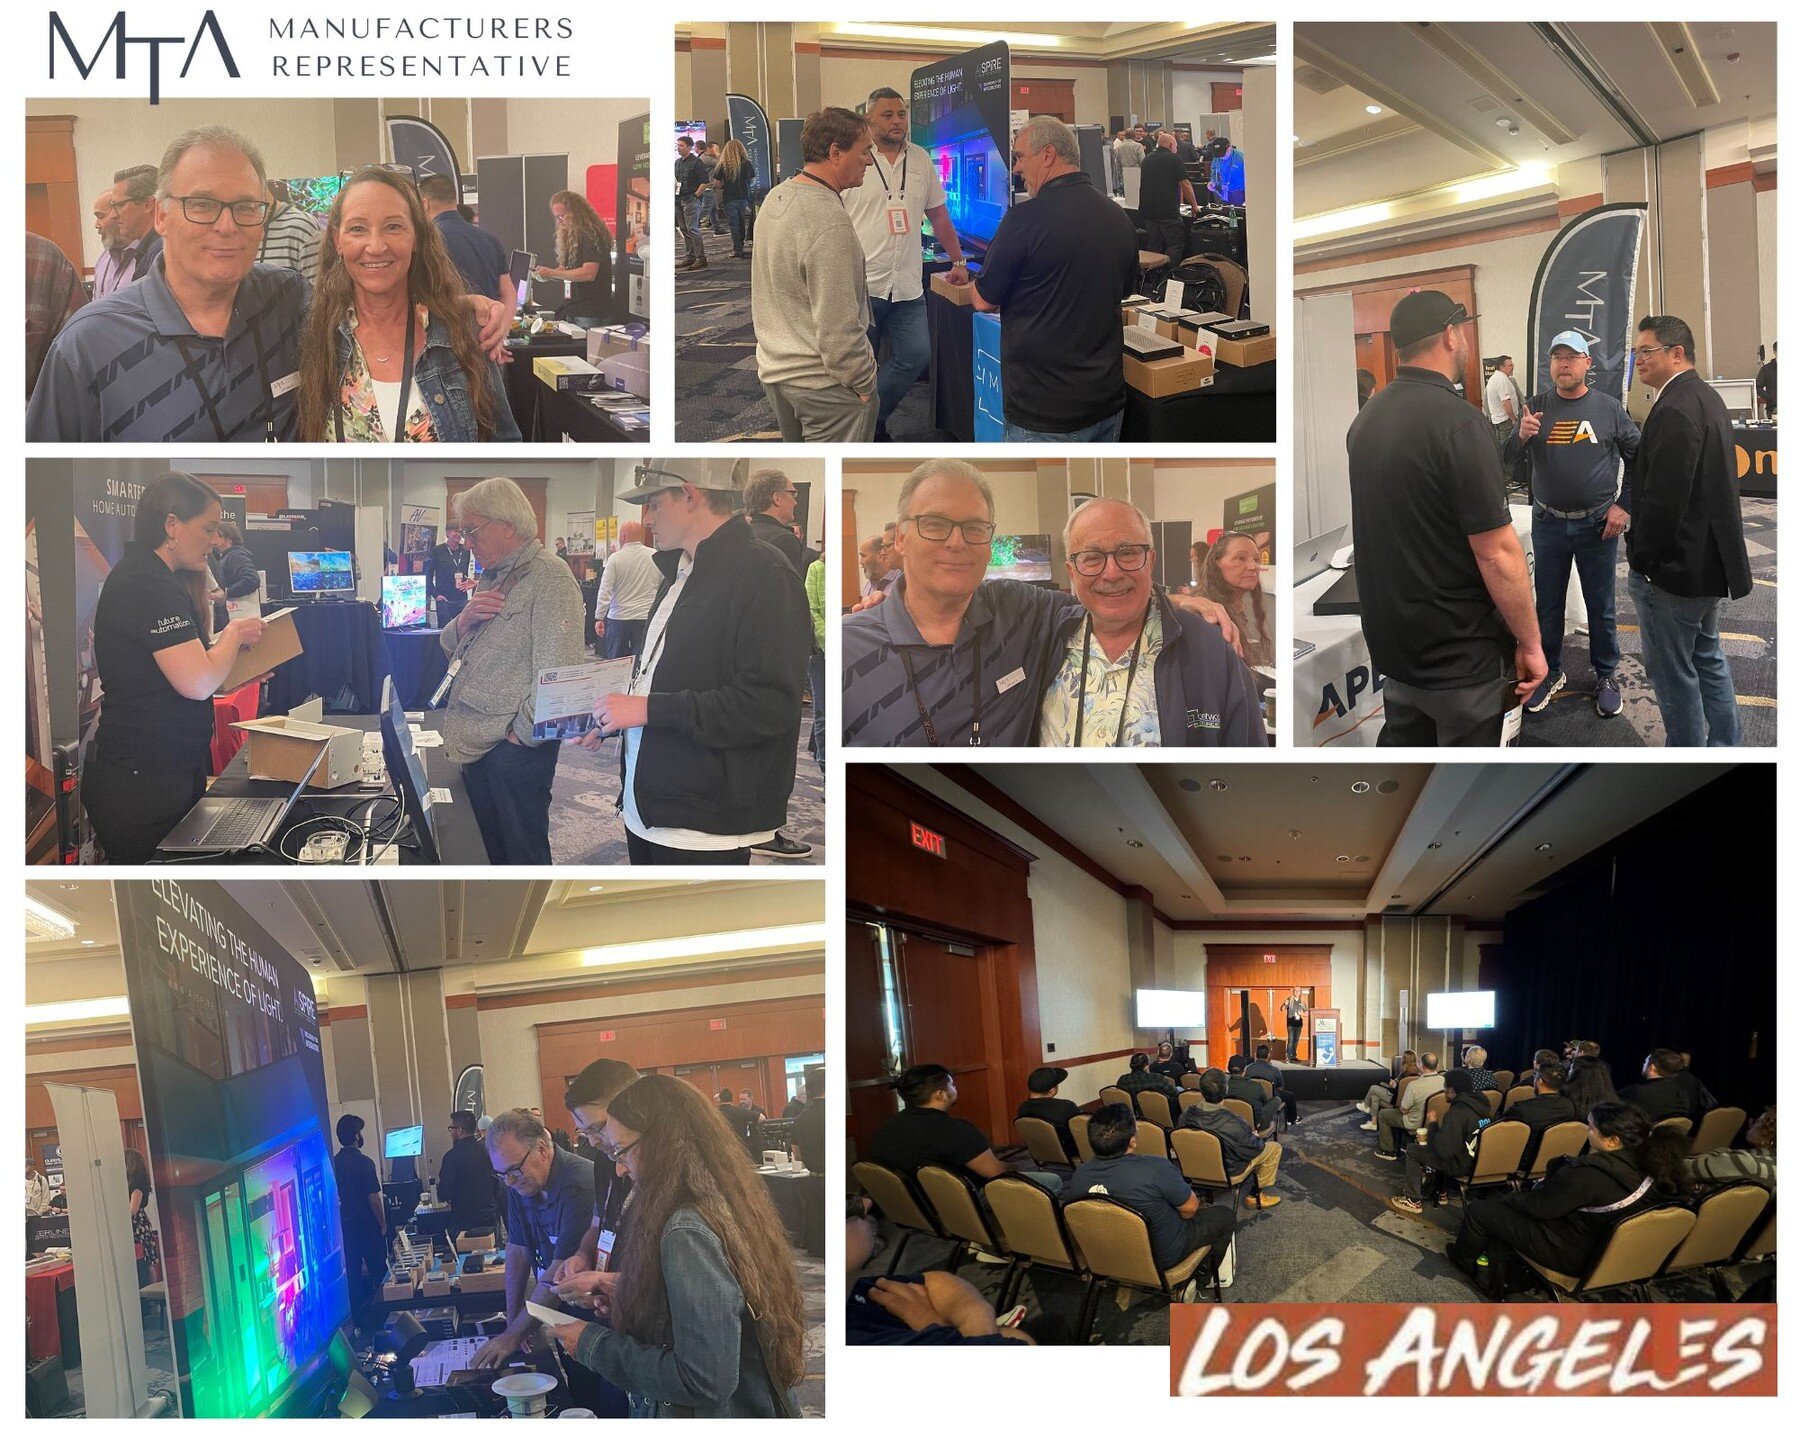 That's a wrap on the SoCal CEDIA Tech Summit! Thank you to all that joined us to learn more about what products our manufacturers have to offer. 

#aispire #wac #seura #masimo #apex technologies #environmental lights #future automation #simplifiedmfg